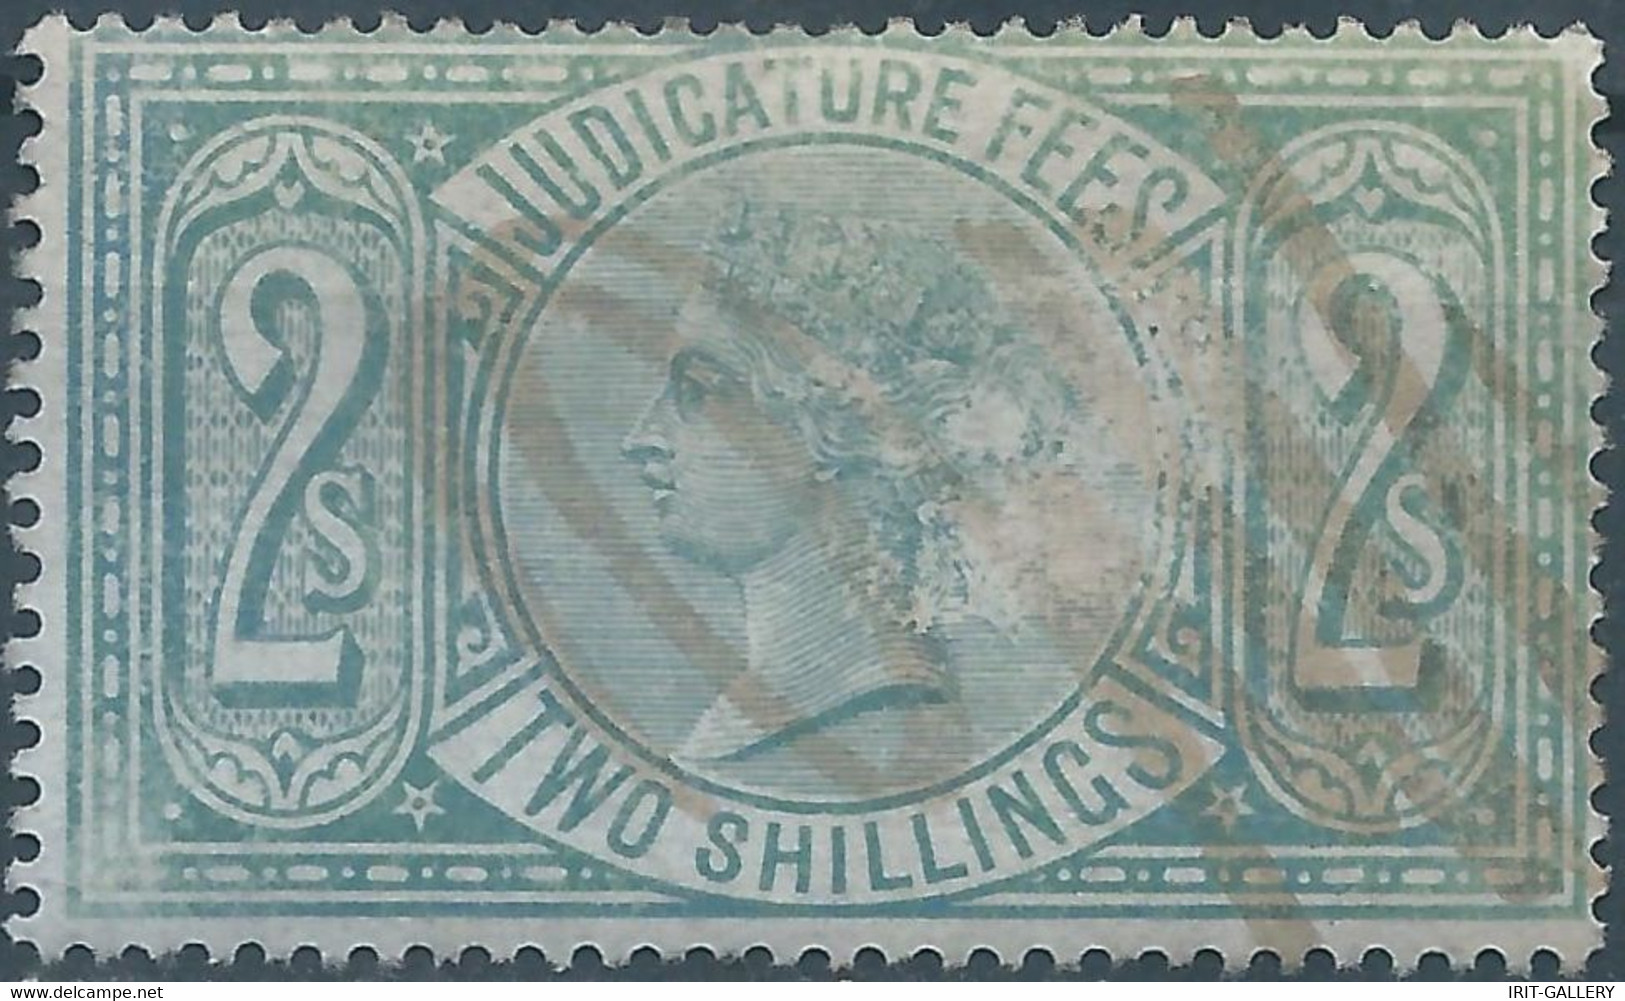 Great Britain-ENGLAND,Queen Victoria,1880-1900 Revenue Stamp Tax Fiscal,JUDICATURE FEES,2 Shillings,Used - Fiscaux